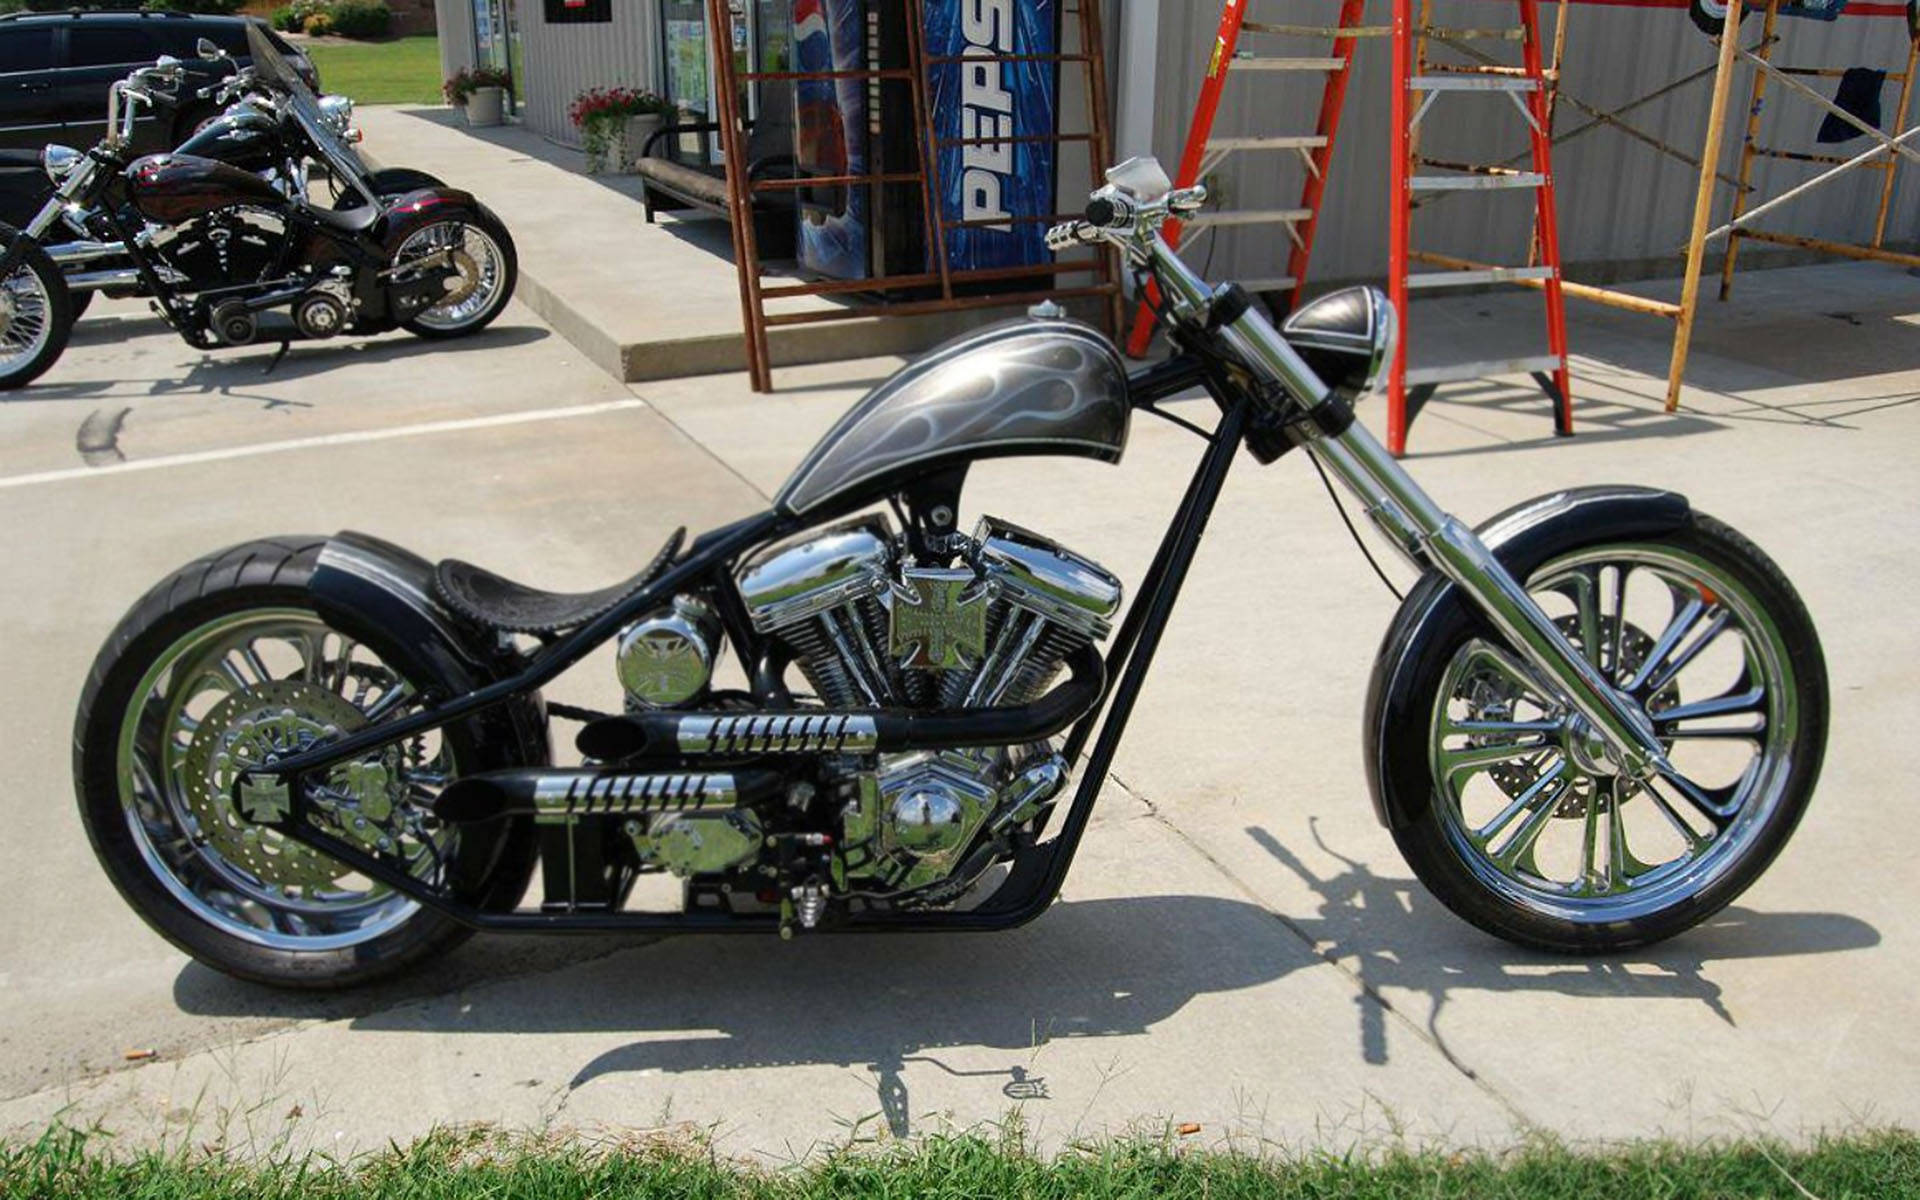 West Coast Choppers Redneck Motorcycle Background